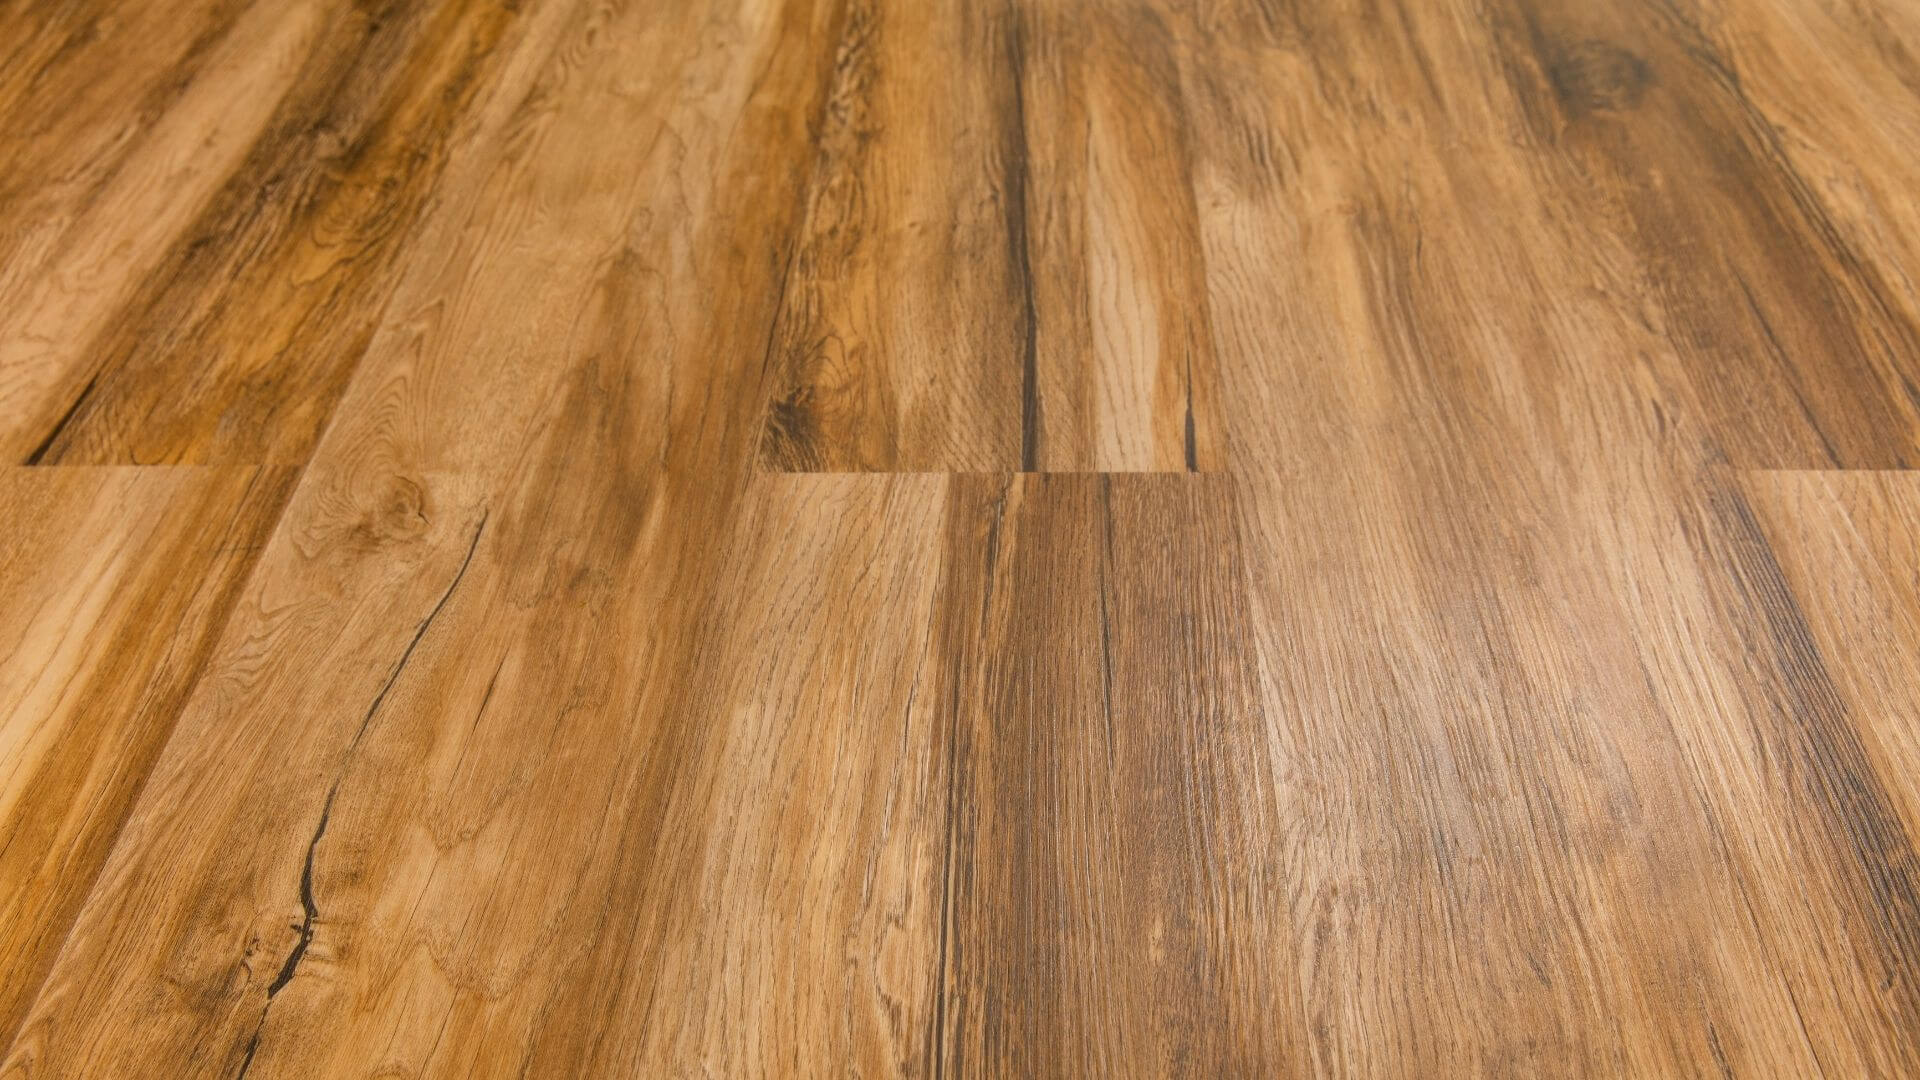 What Causes Laminate Flooring to Wear